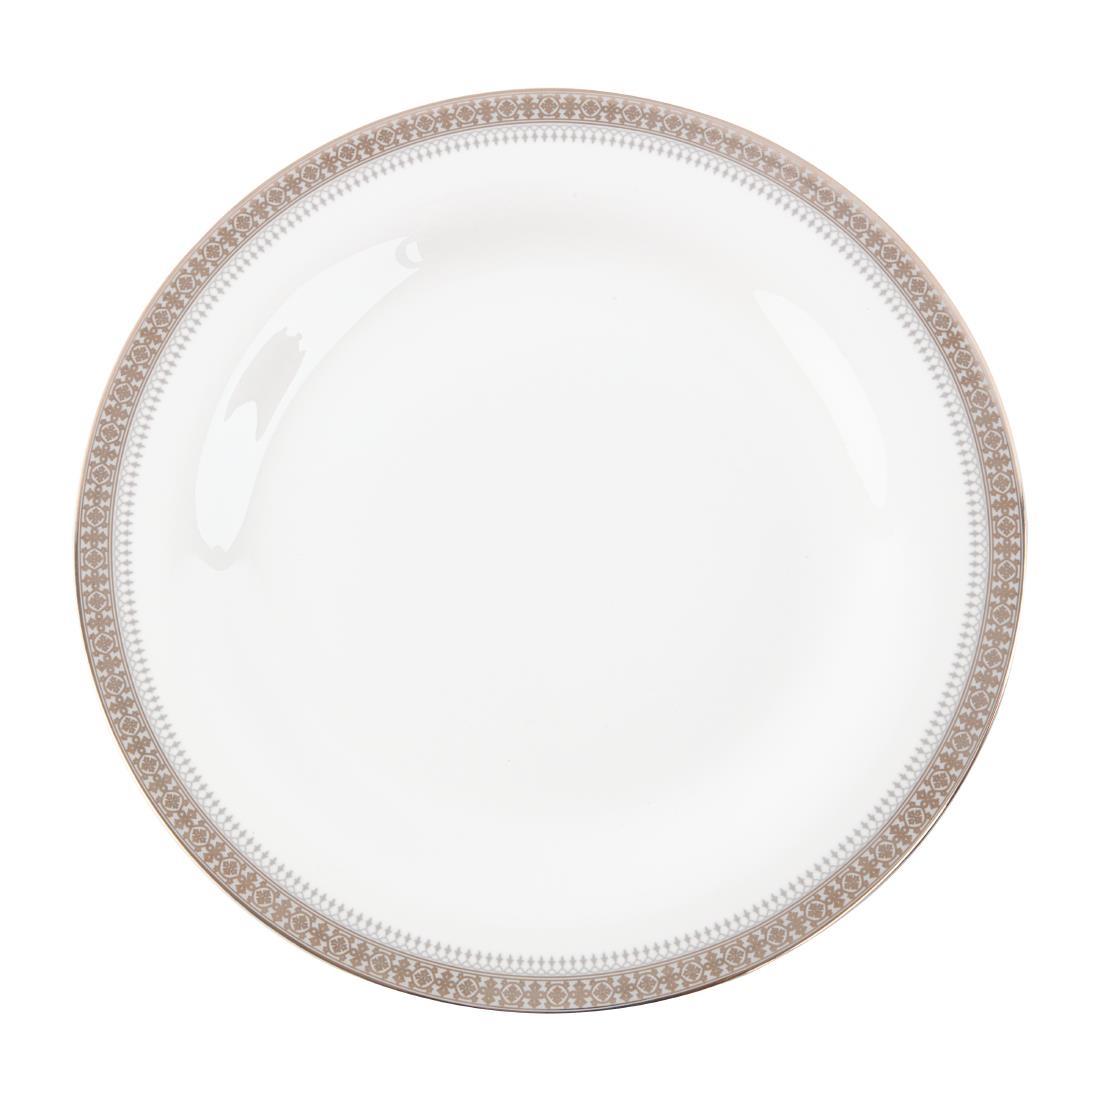 Royal Bone Afternoon Tea Couronne Plate 255mm (Pack of 6) - FB738  - 1